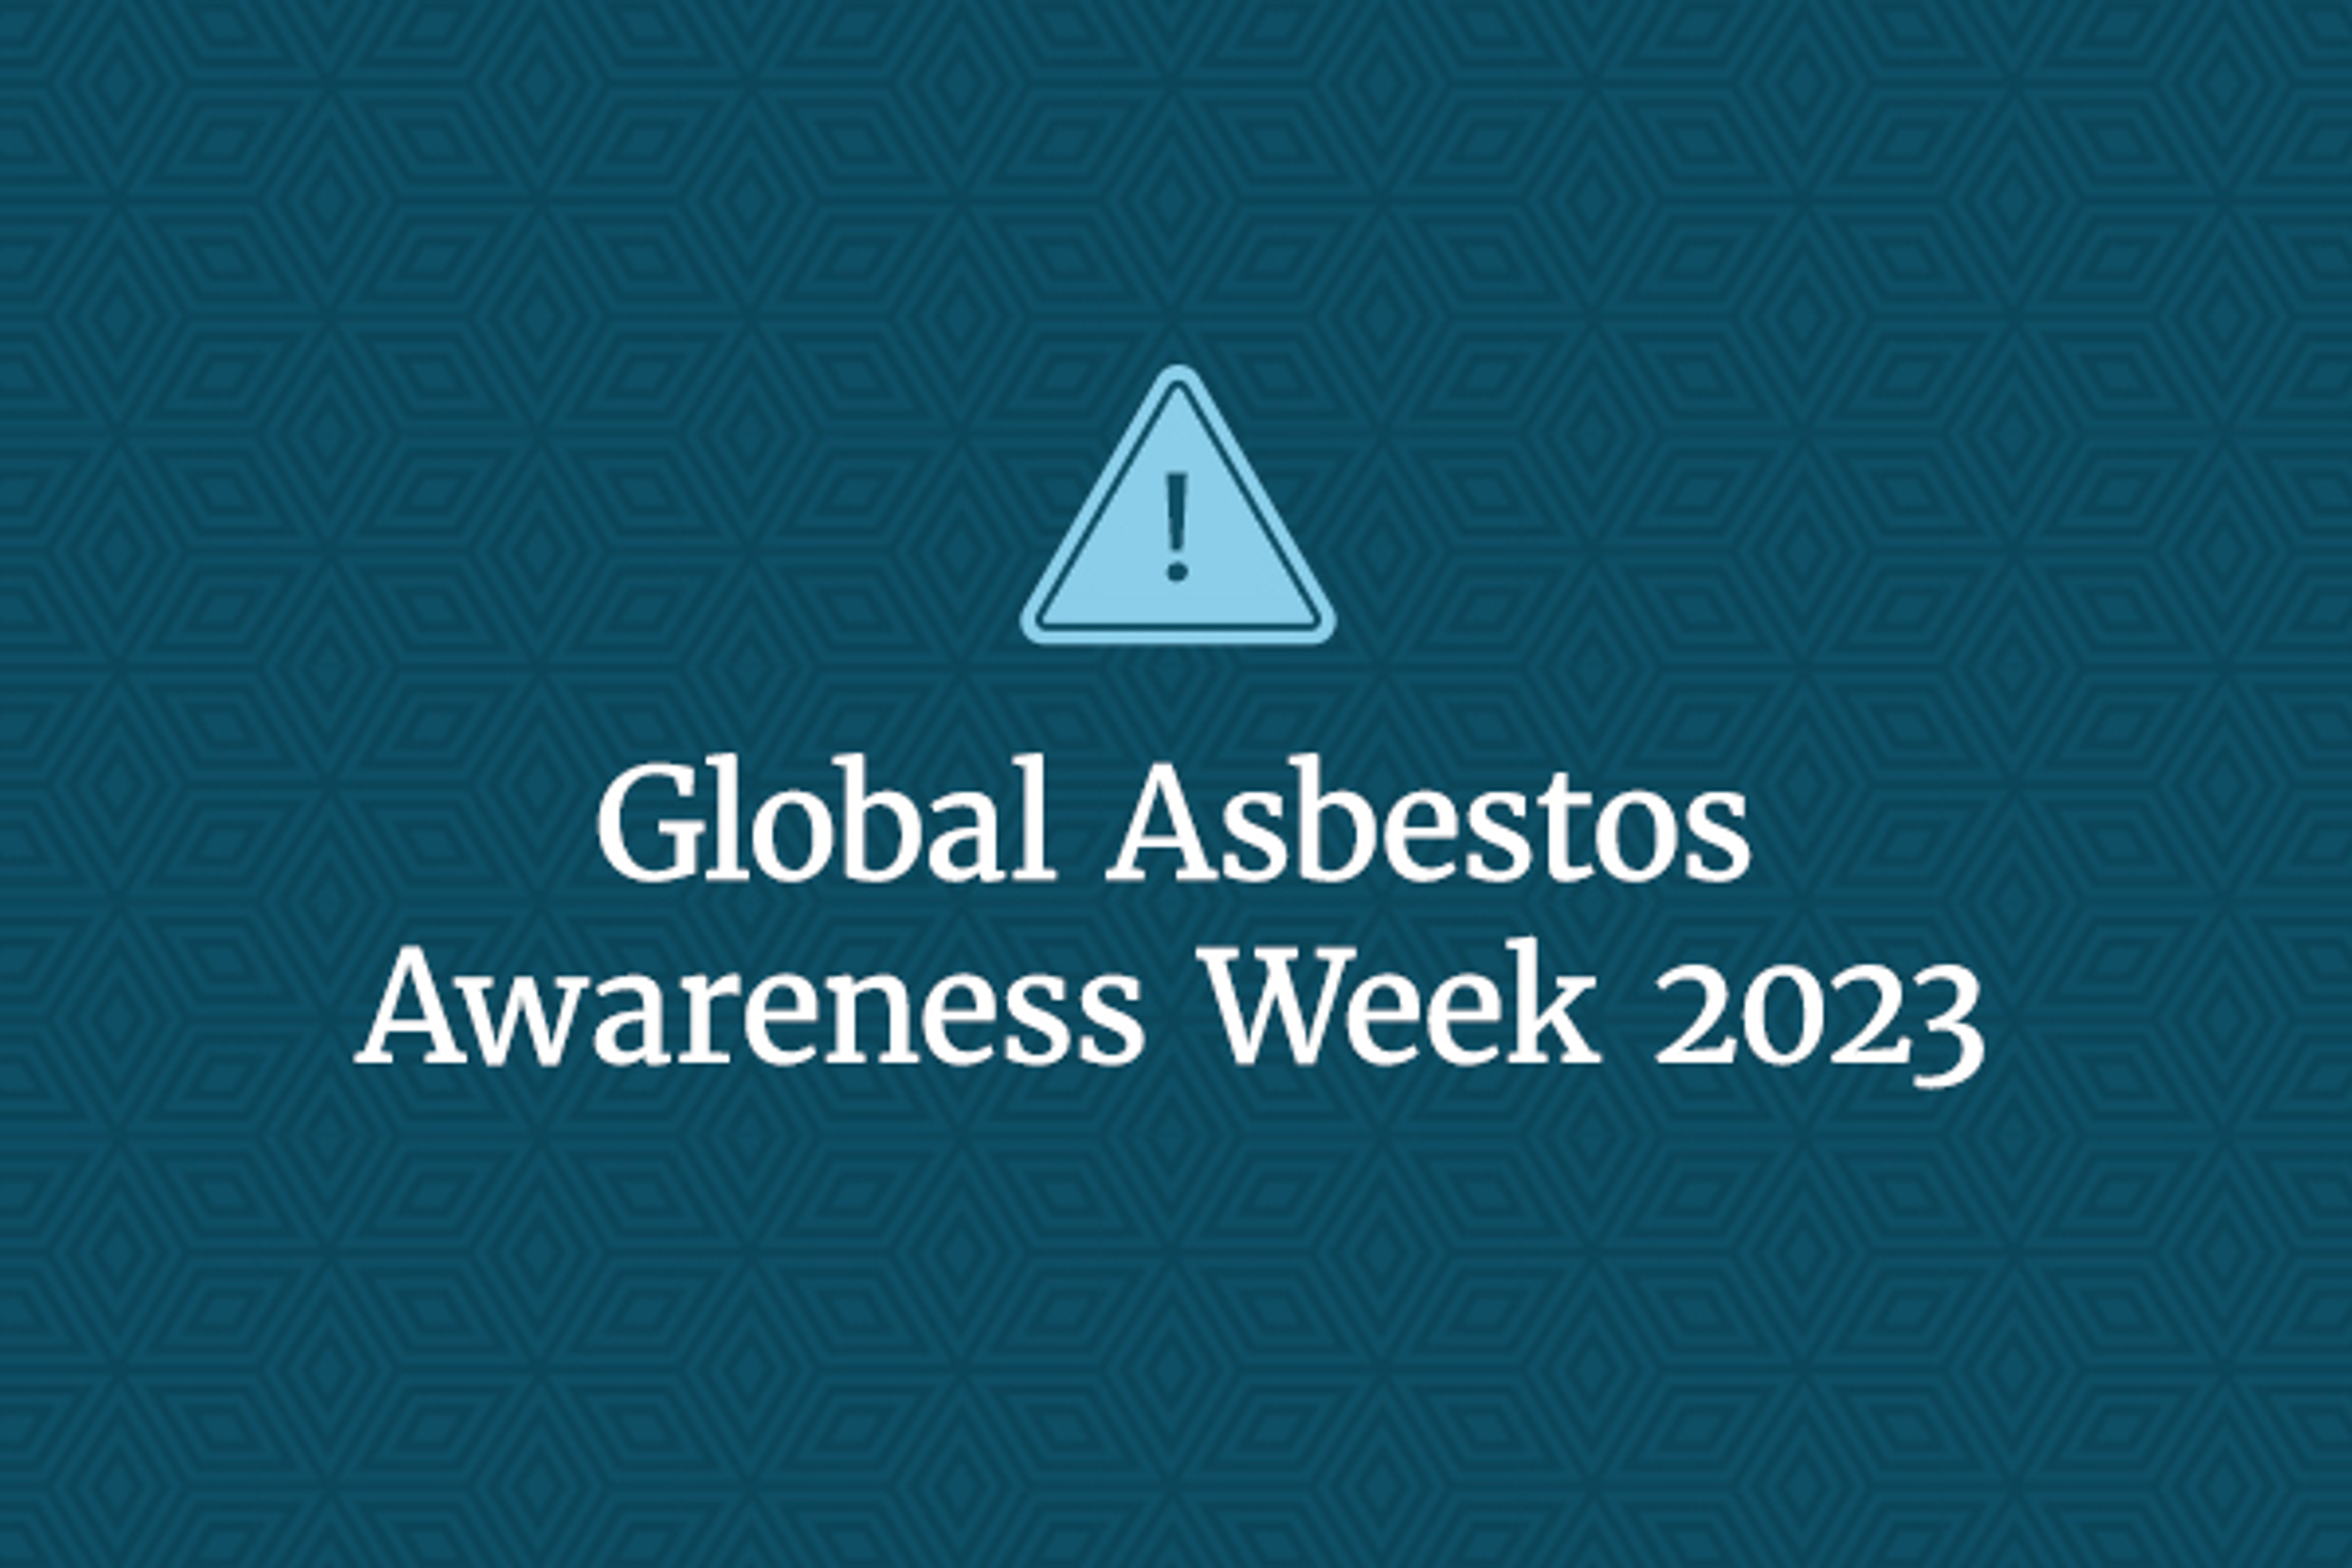 The words 'Global Asbestos Awareness Week 2023' in white on a dark teal background. There is a light blue 'caution' icon featuring an exclamation point in an upright triangle.